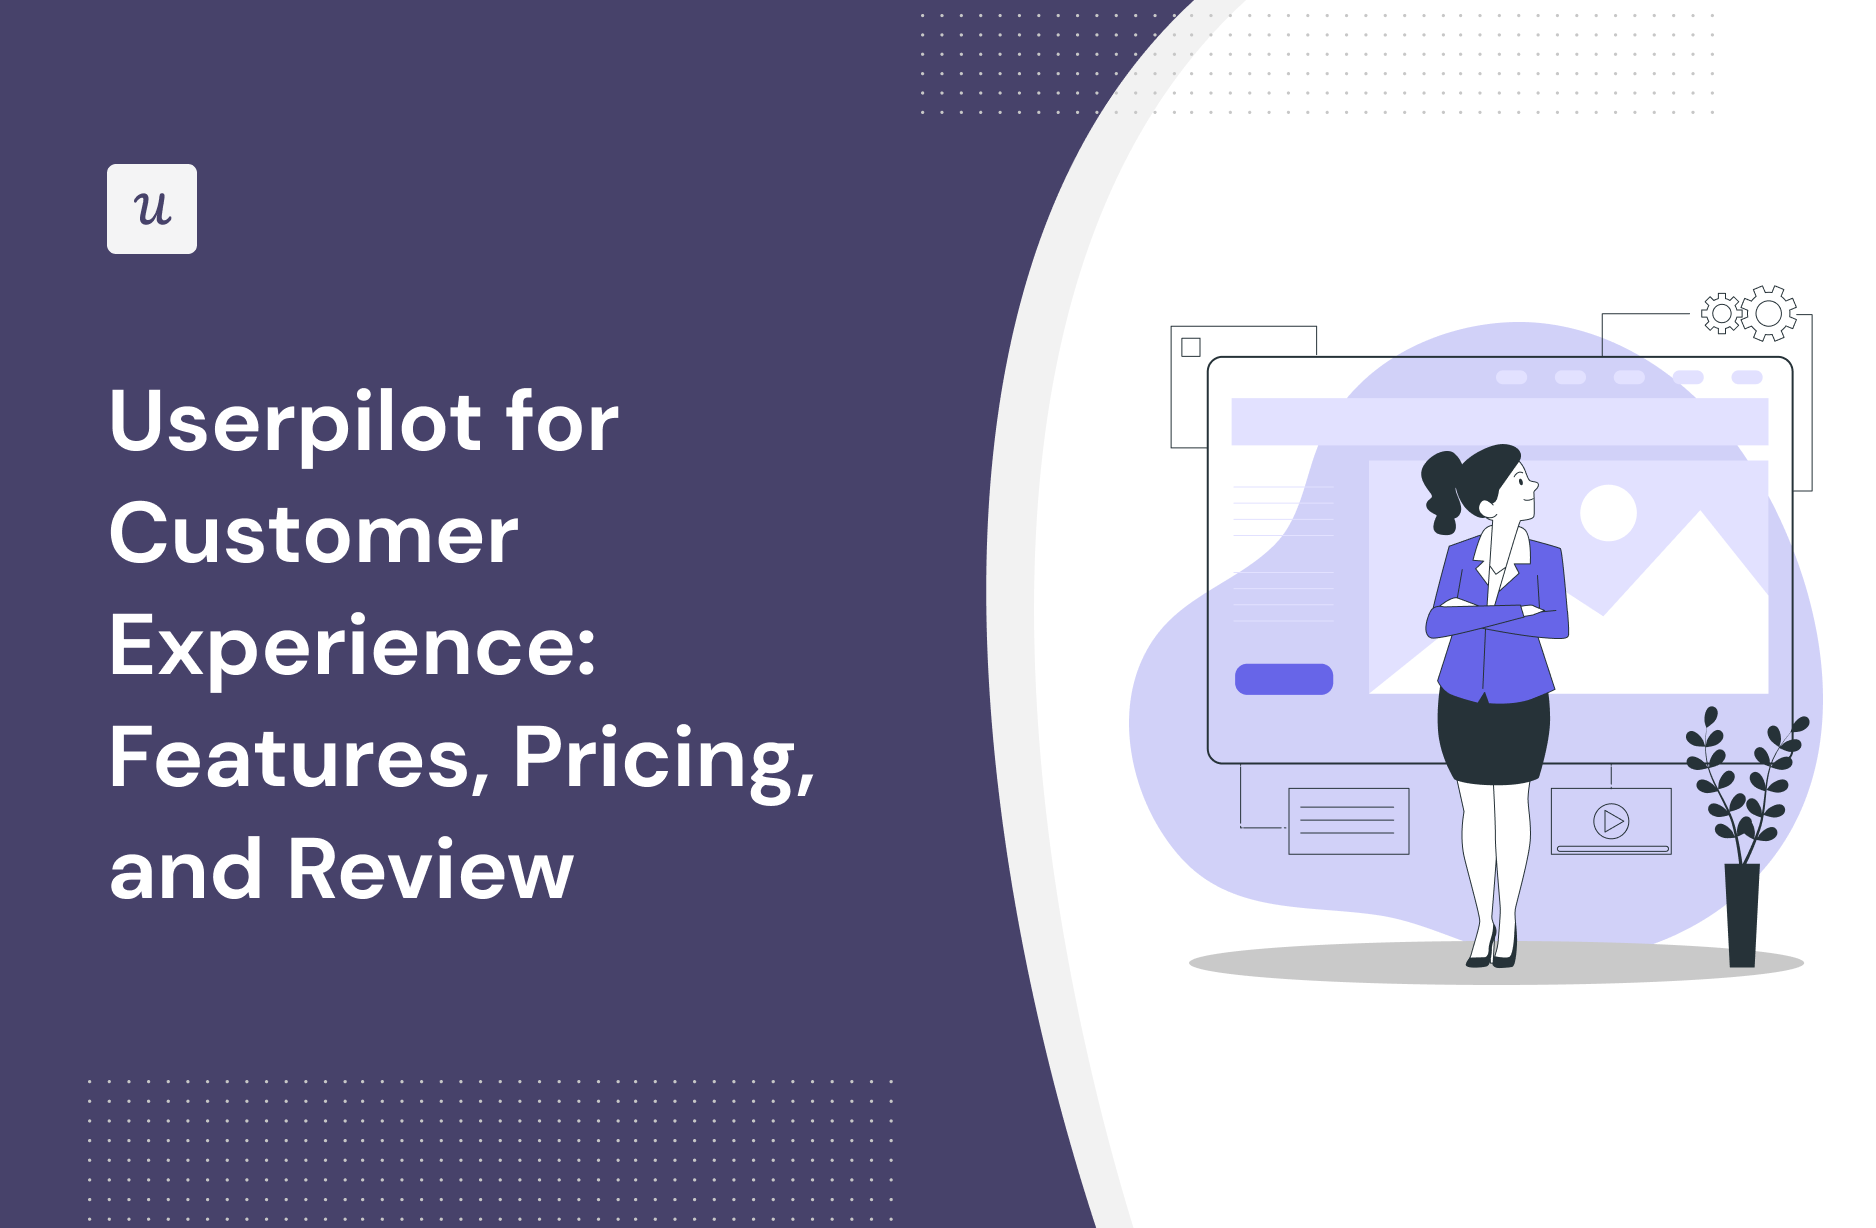 Userpilot for Customer Experience: Features, Pricing, and Review